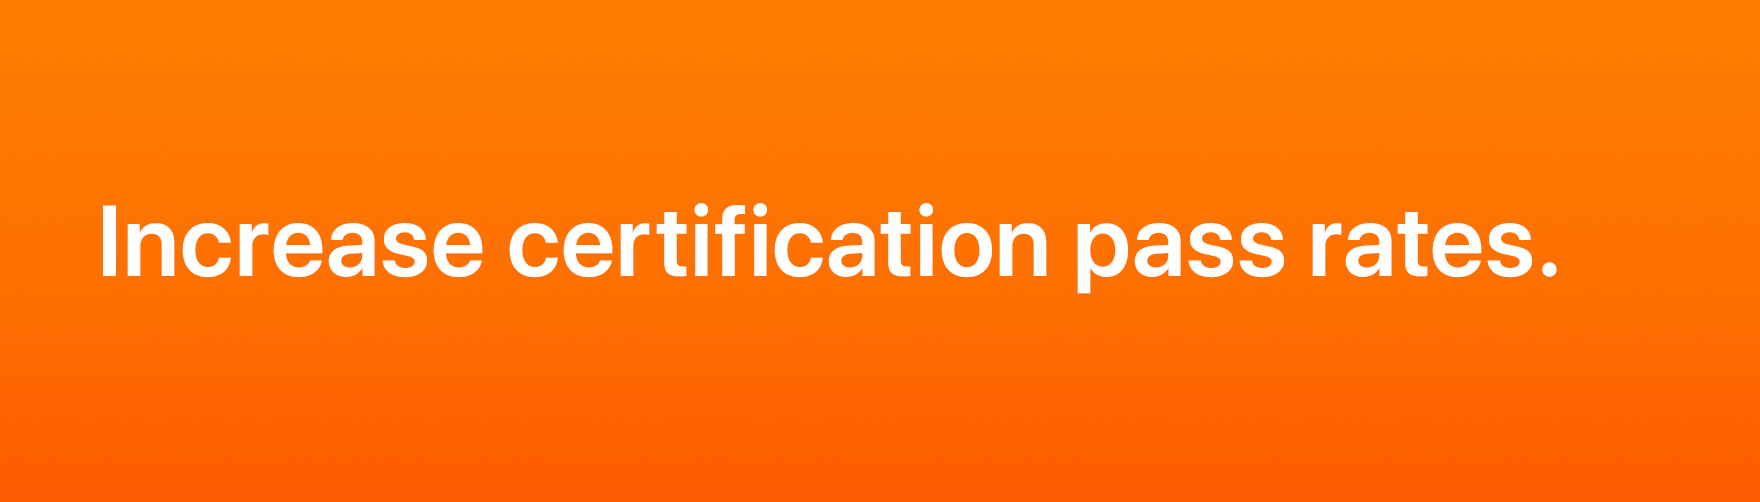 Practice, Increase certification pass rates